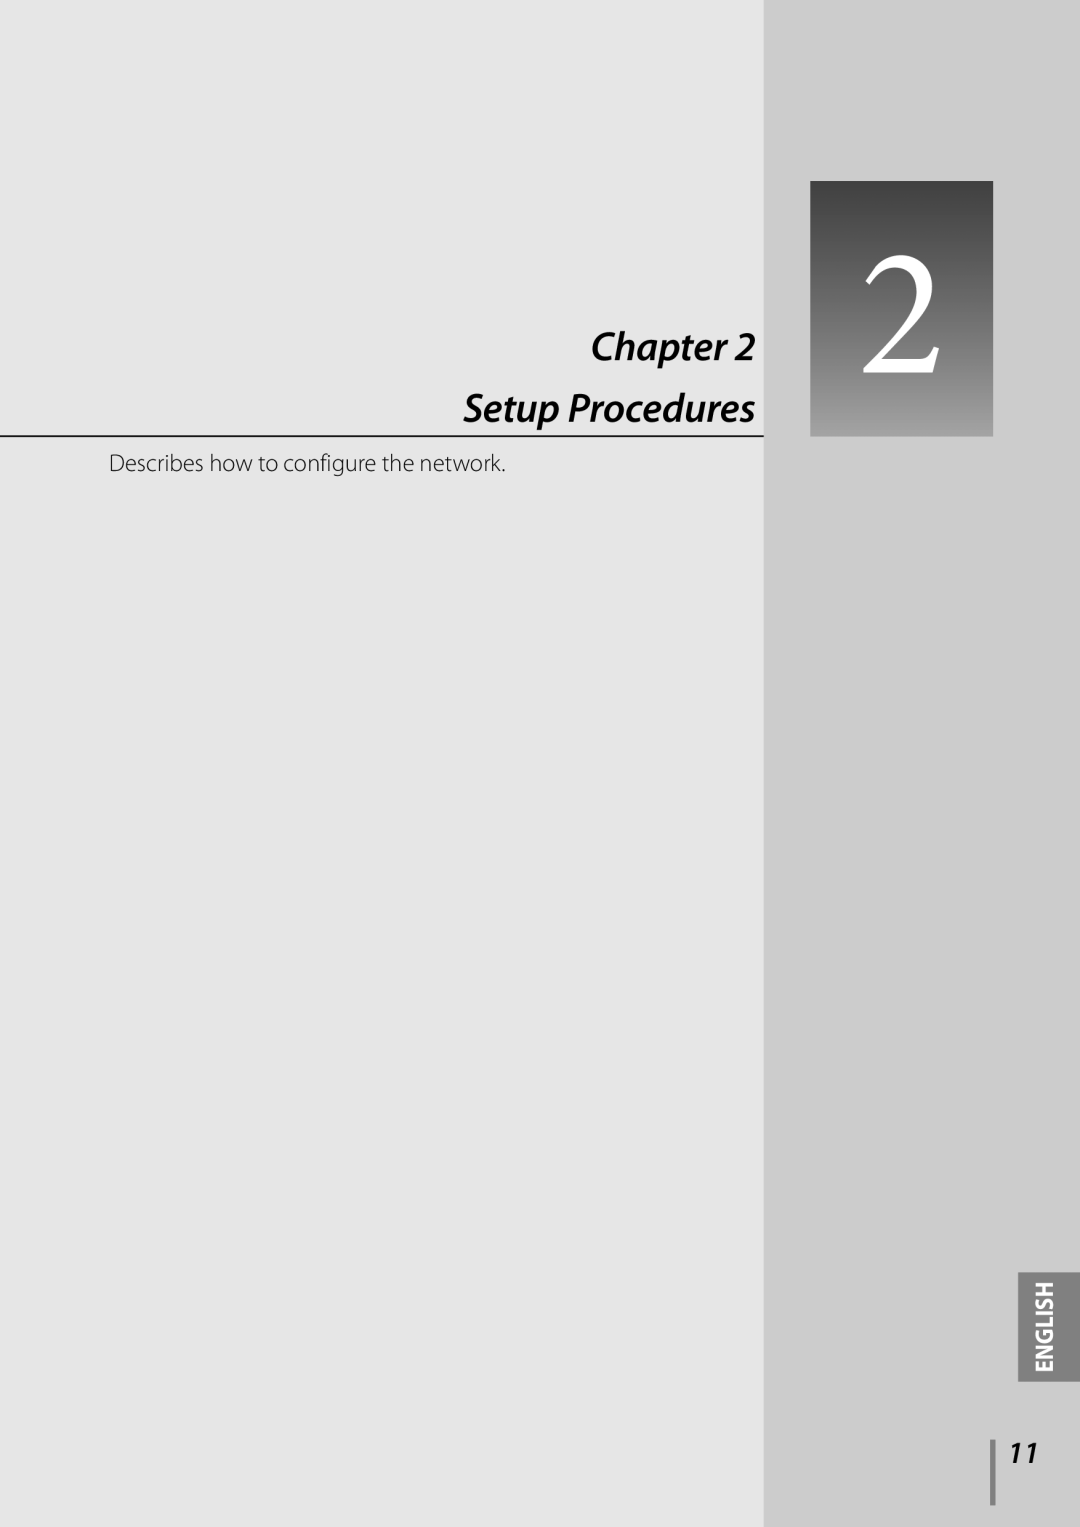 Sanyo Projector owner manual Chapter, Setup Procedures, Describes how to configure the network, English 